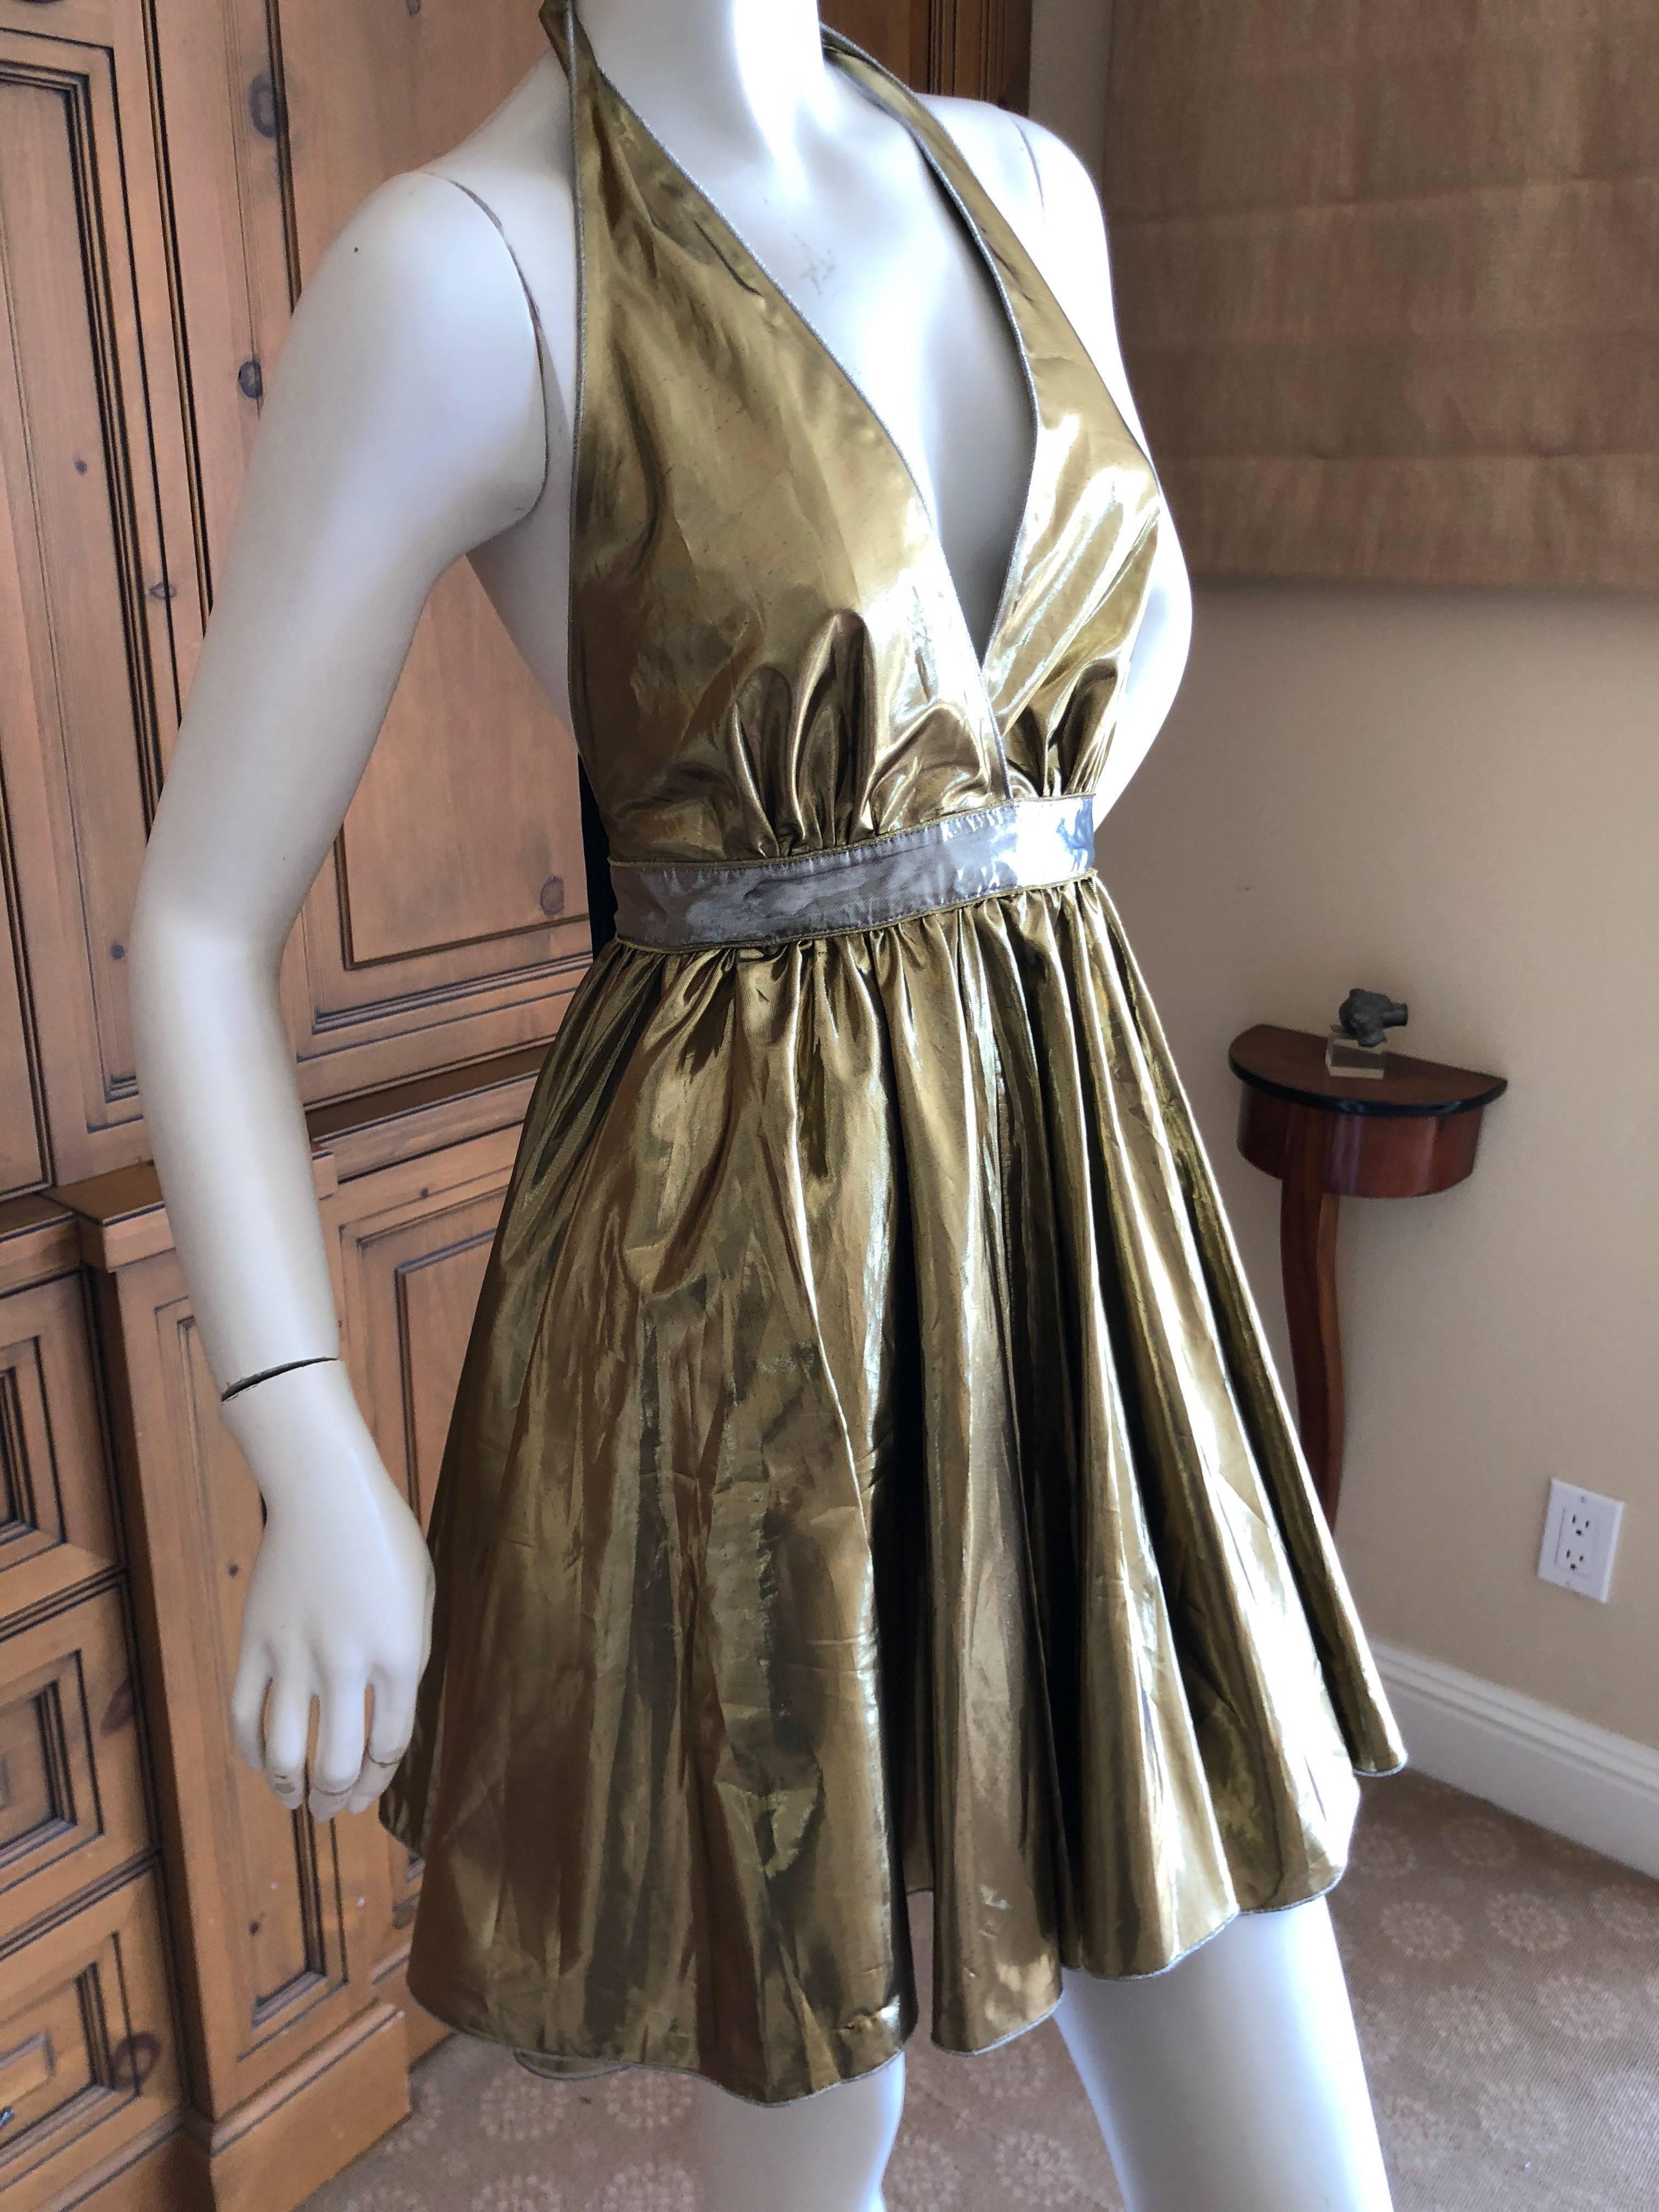 Dolce & Gabbana D&G Vintage Cocktail Party Halter Mini Dress   In Excellent Condition For Sale In Cloverdale, CA